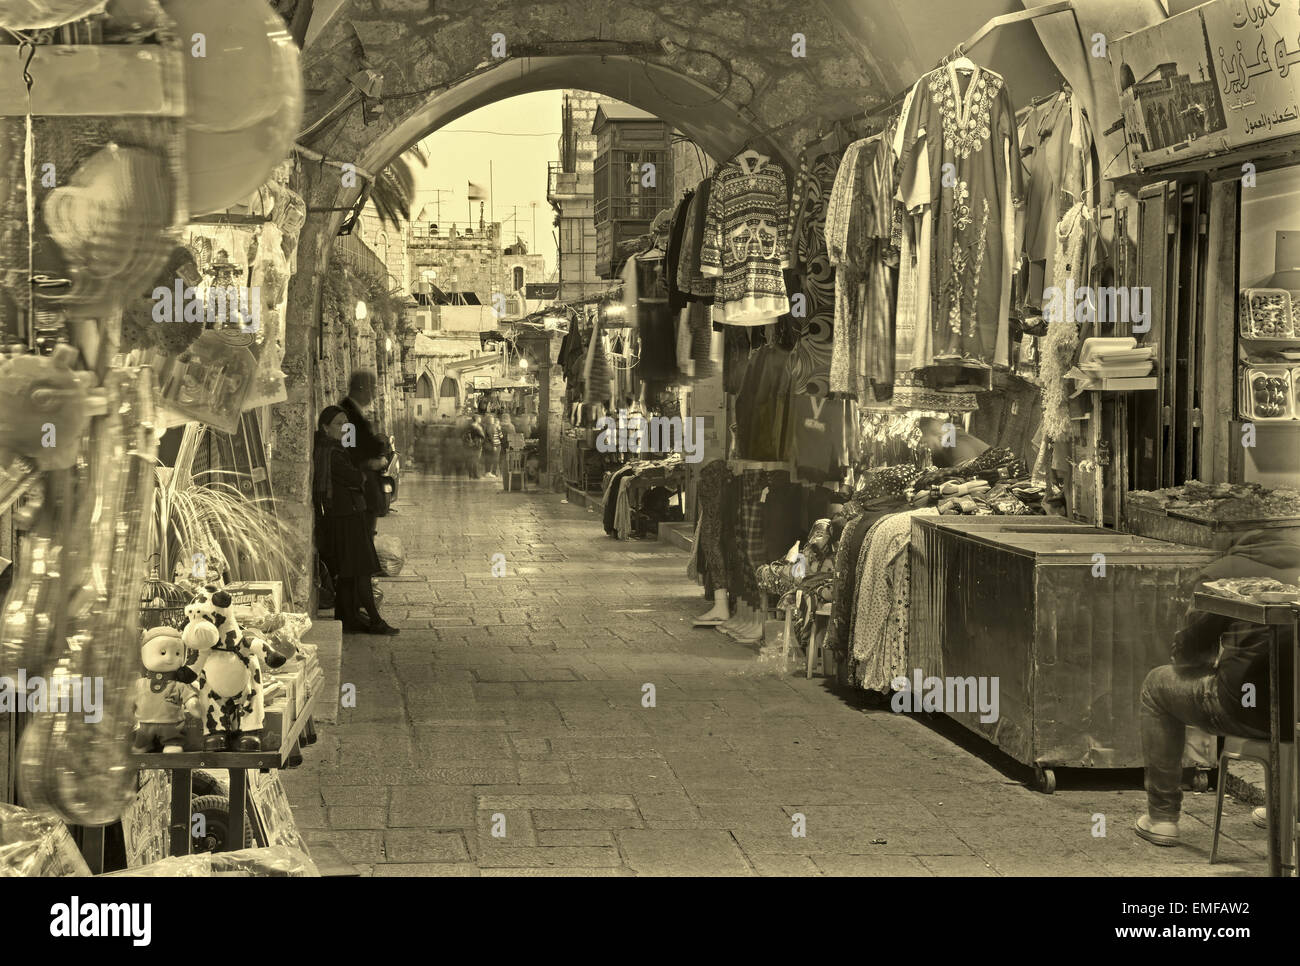 JERUSALEM, ISRAEL - MARCH 3, 2015: The market street in old town at full activity. Stock Photo